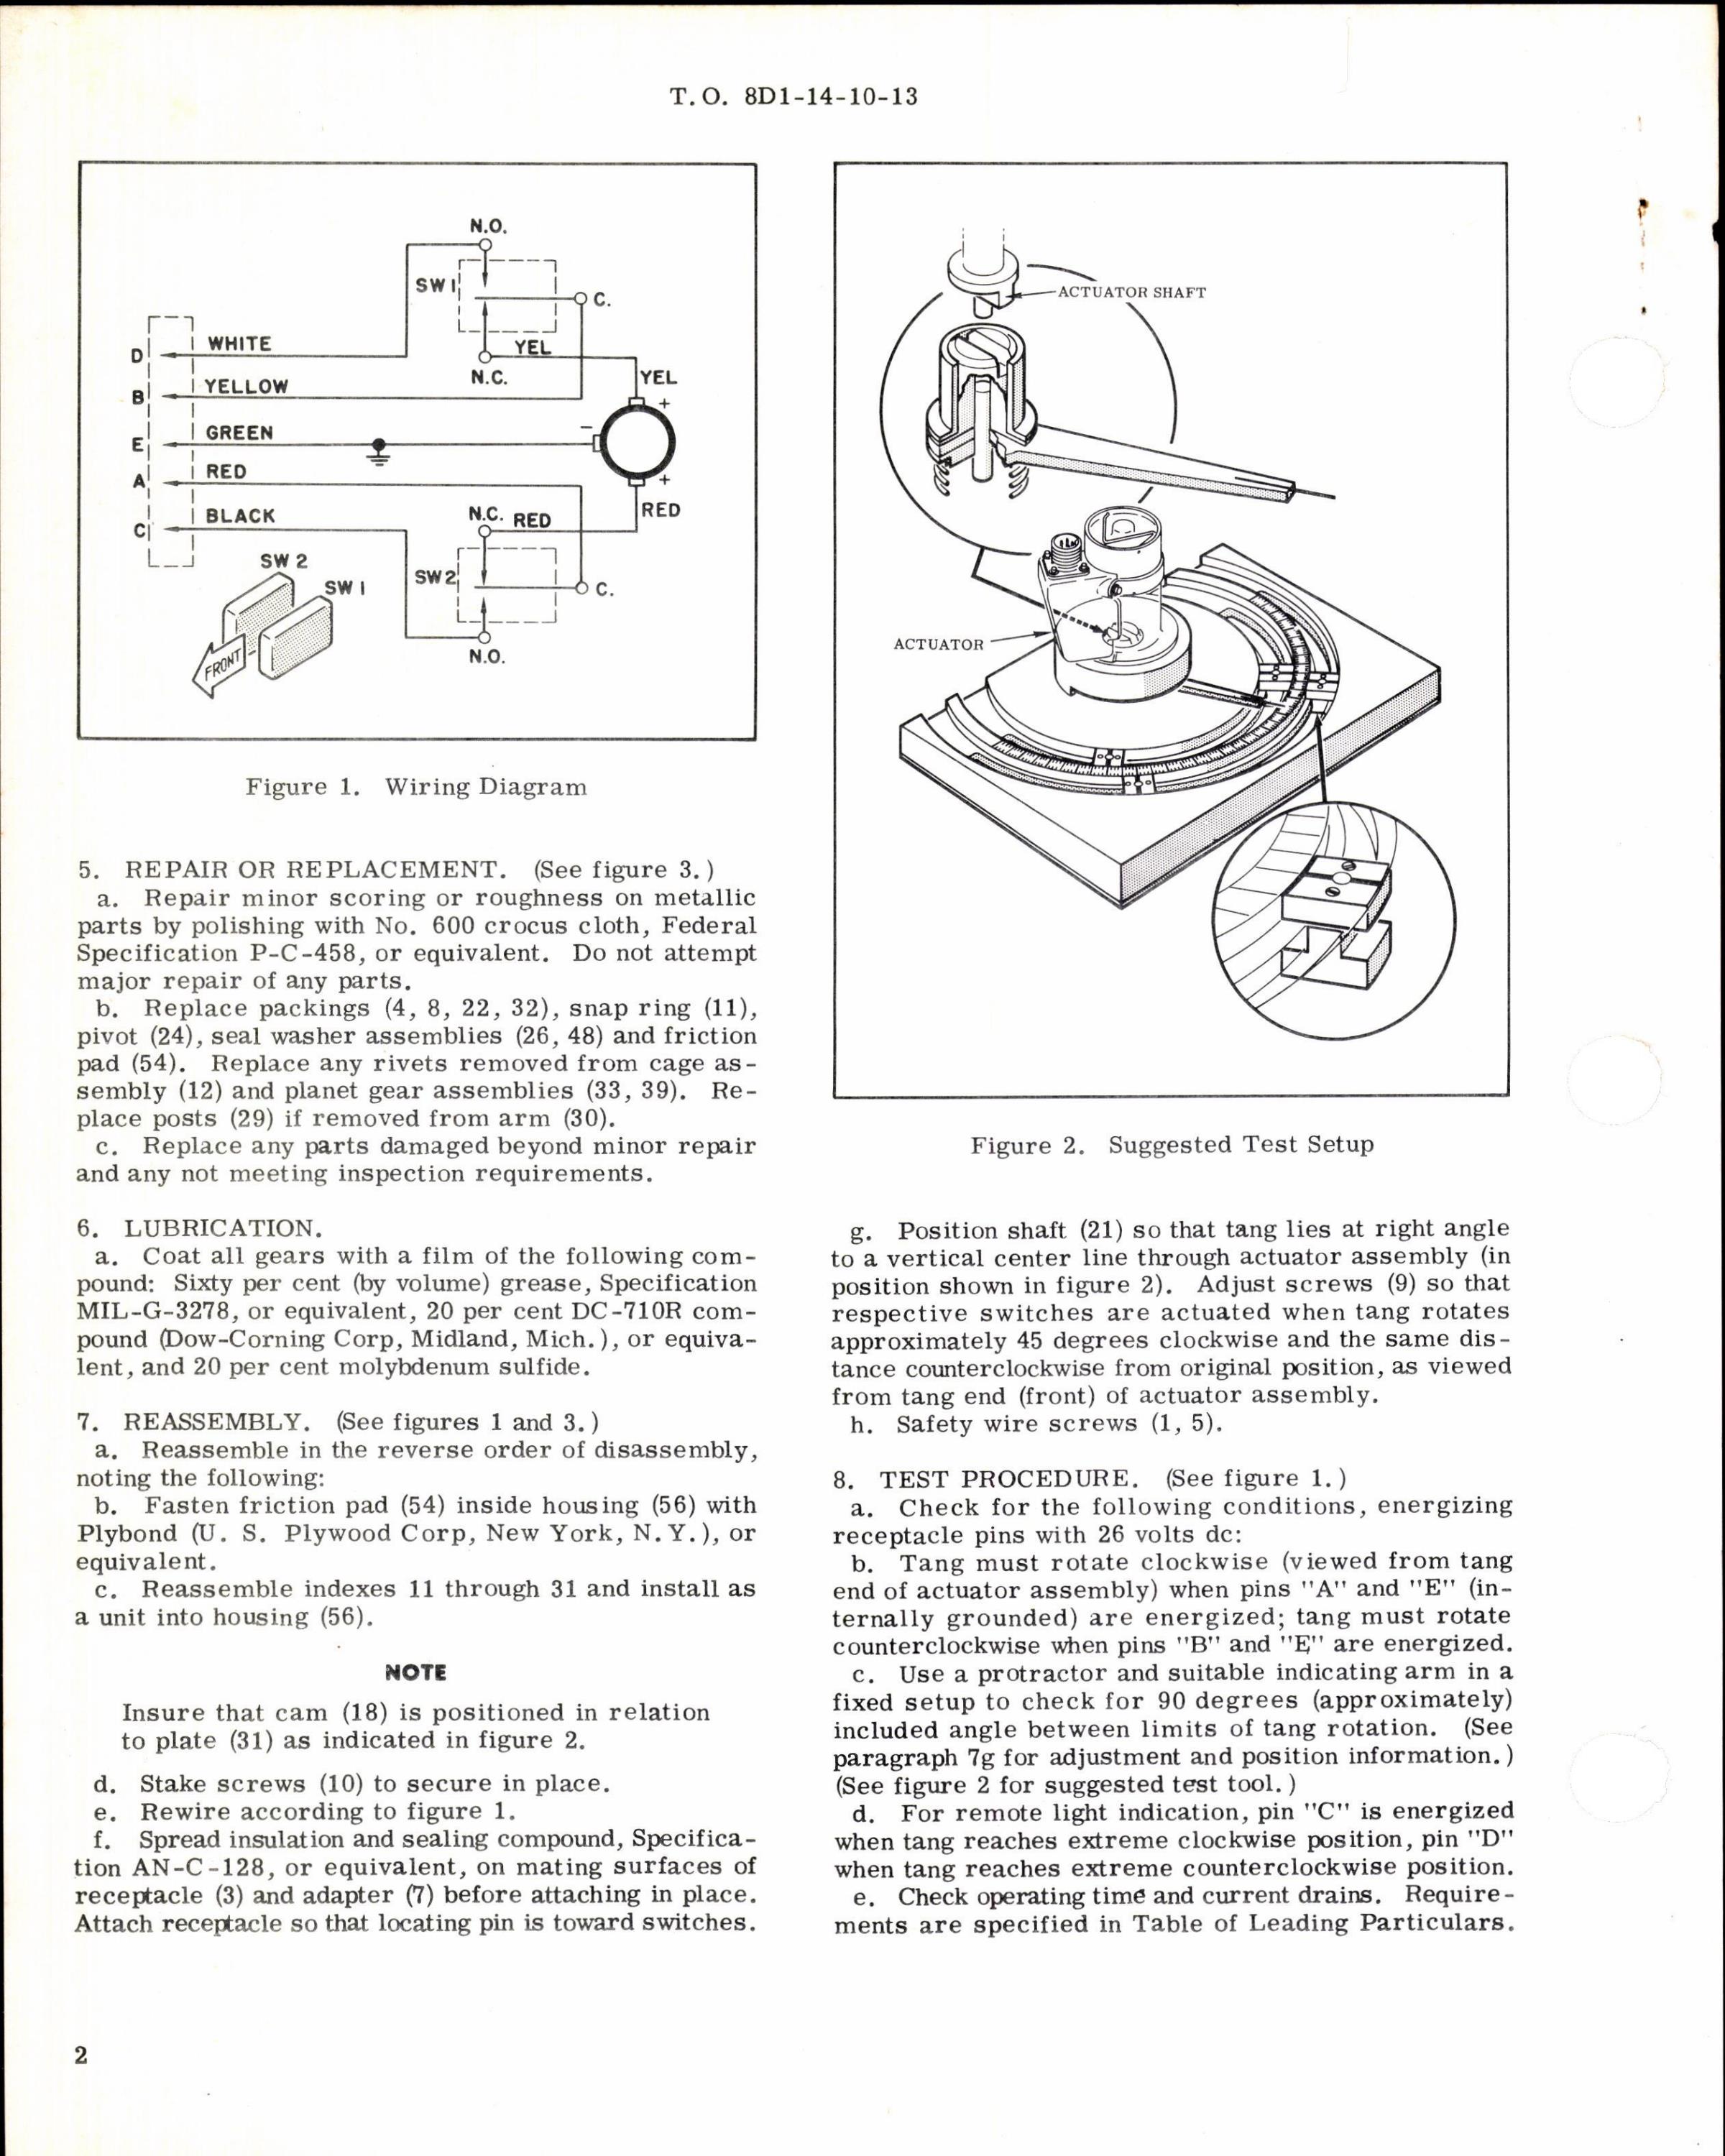 Sample page 2 from AirCorps Library document: Instructions w Parts Breakdown for Actuator Assembly No 106128